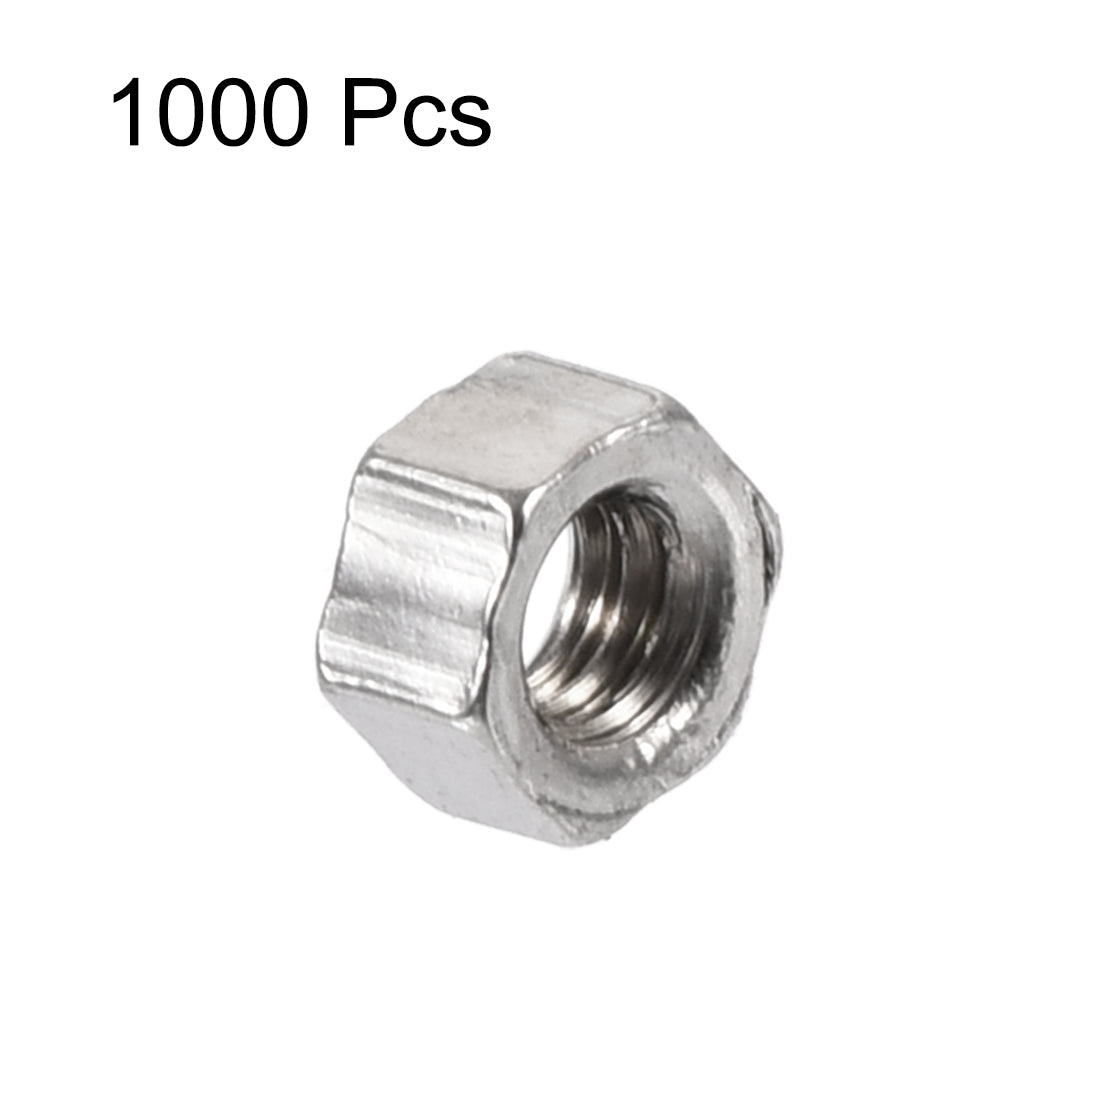 uxcell Uxcell M1.6 x 1.5mm Nickel Plated Internal Threaded Hexagon Hex Nuts DIN 934 1000PCS